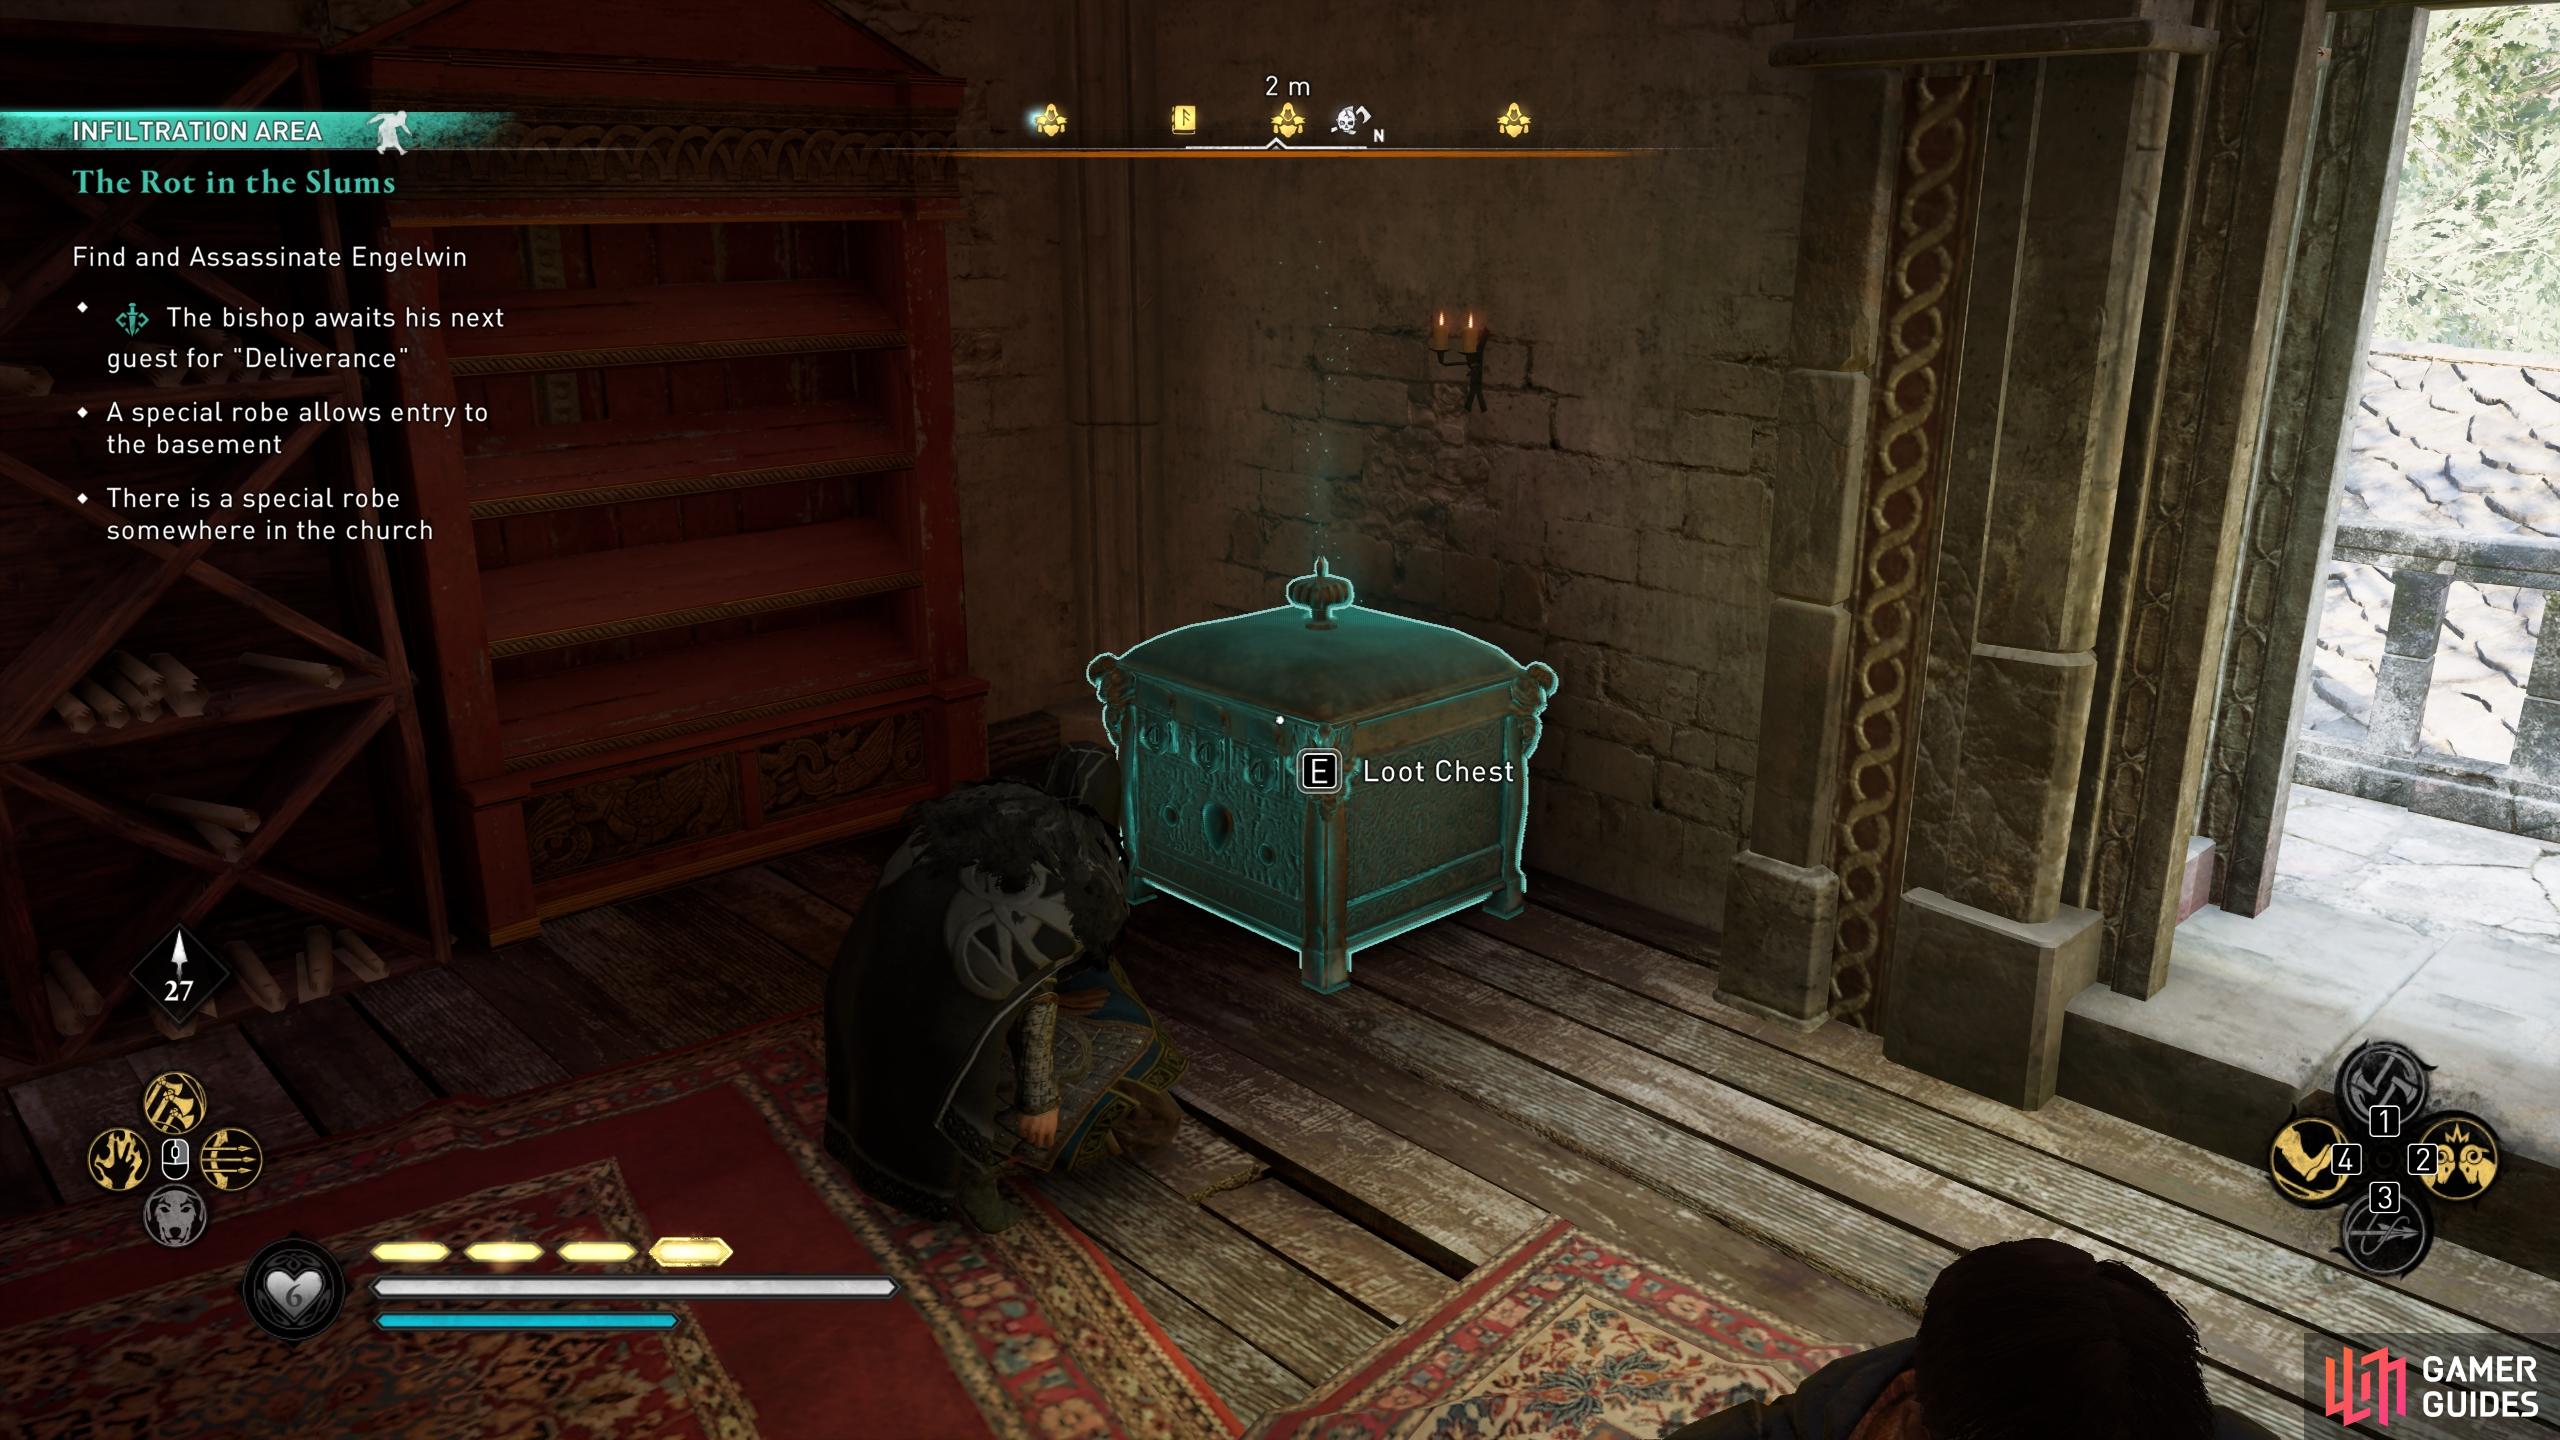 Loot the treasure chest for the robes which will grant you access to the ritual in the basement.